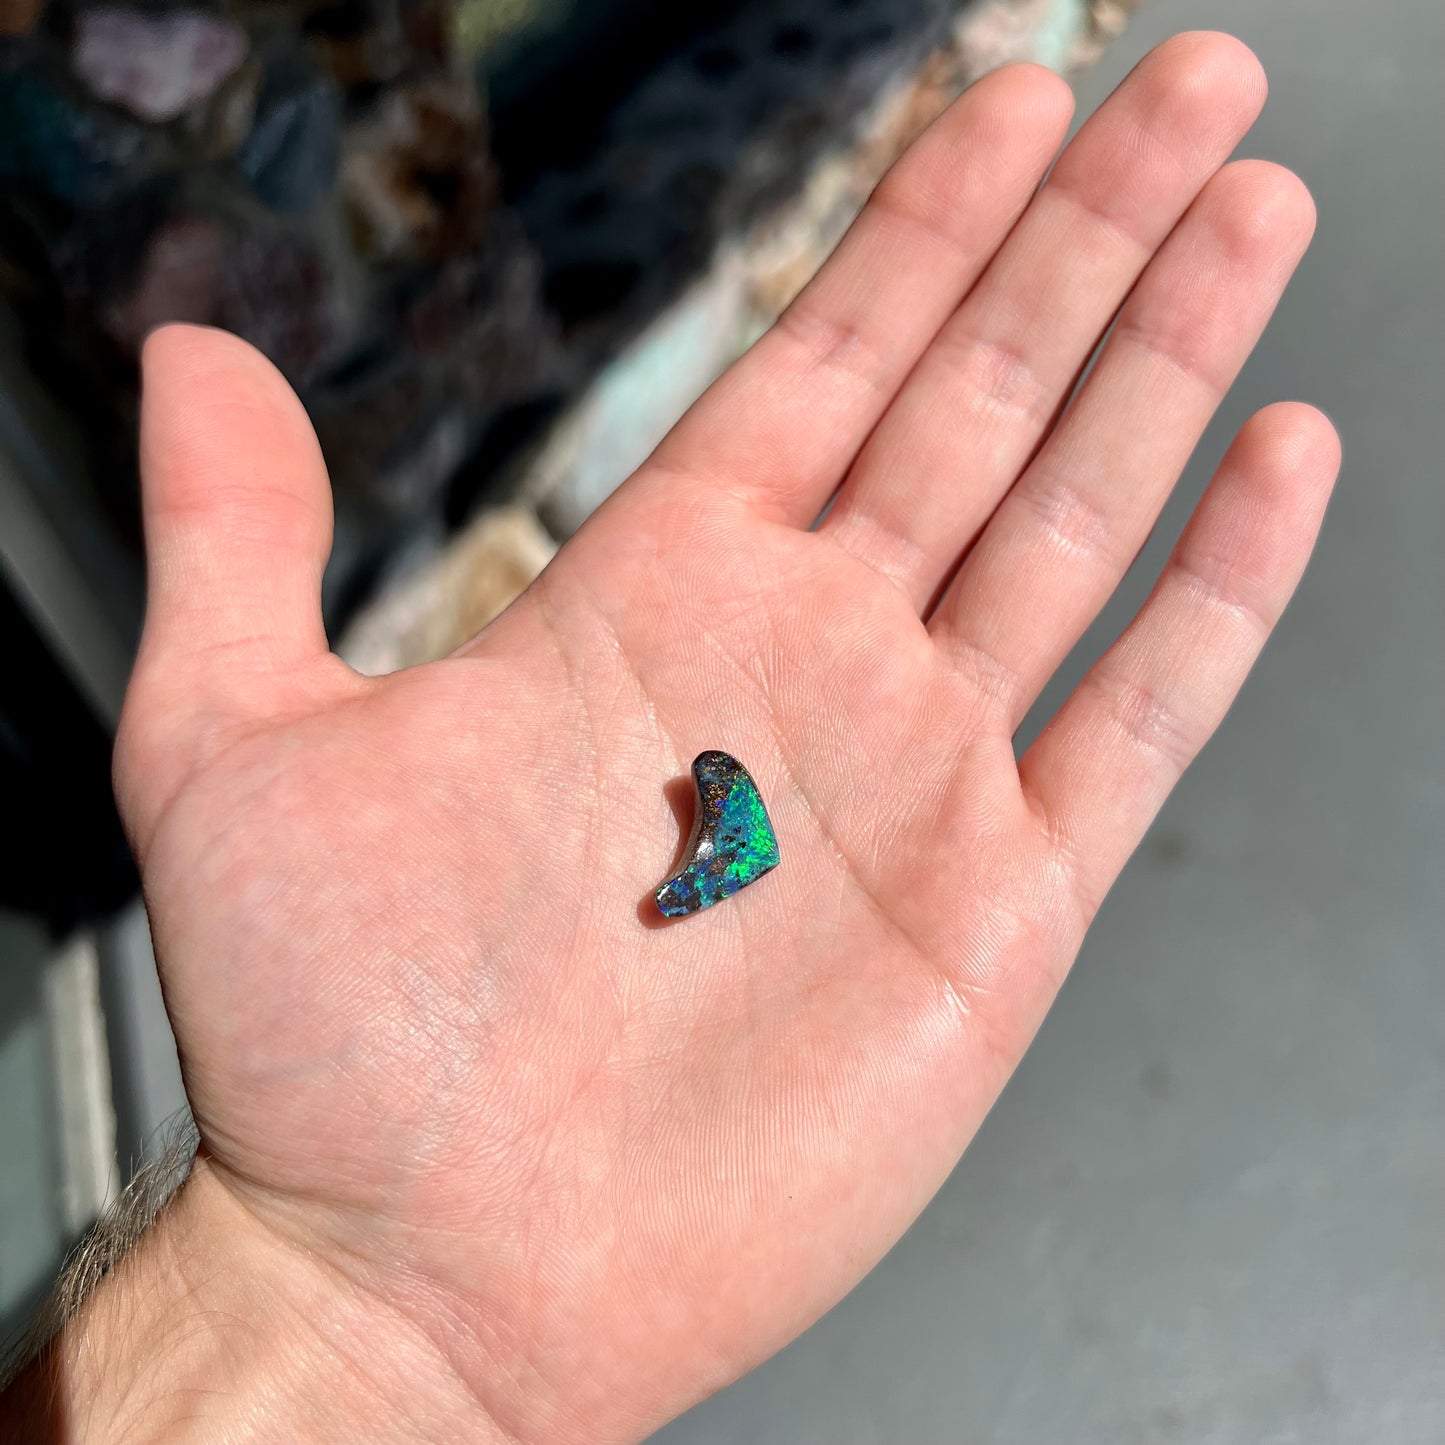 A loose, polished, boomerang shaped boulder opal stone from Queensland, Australia.